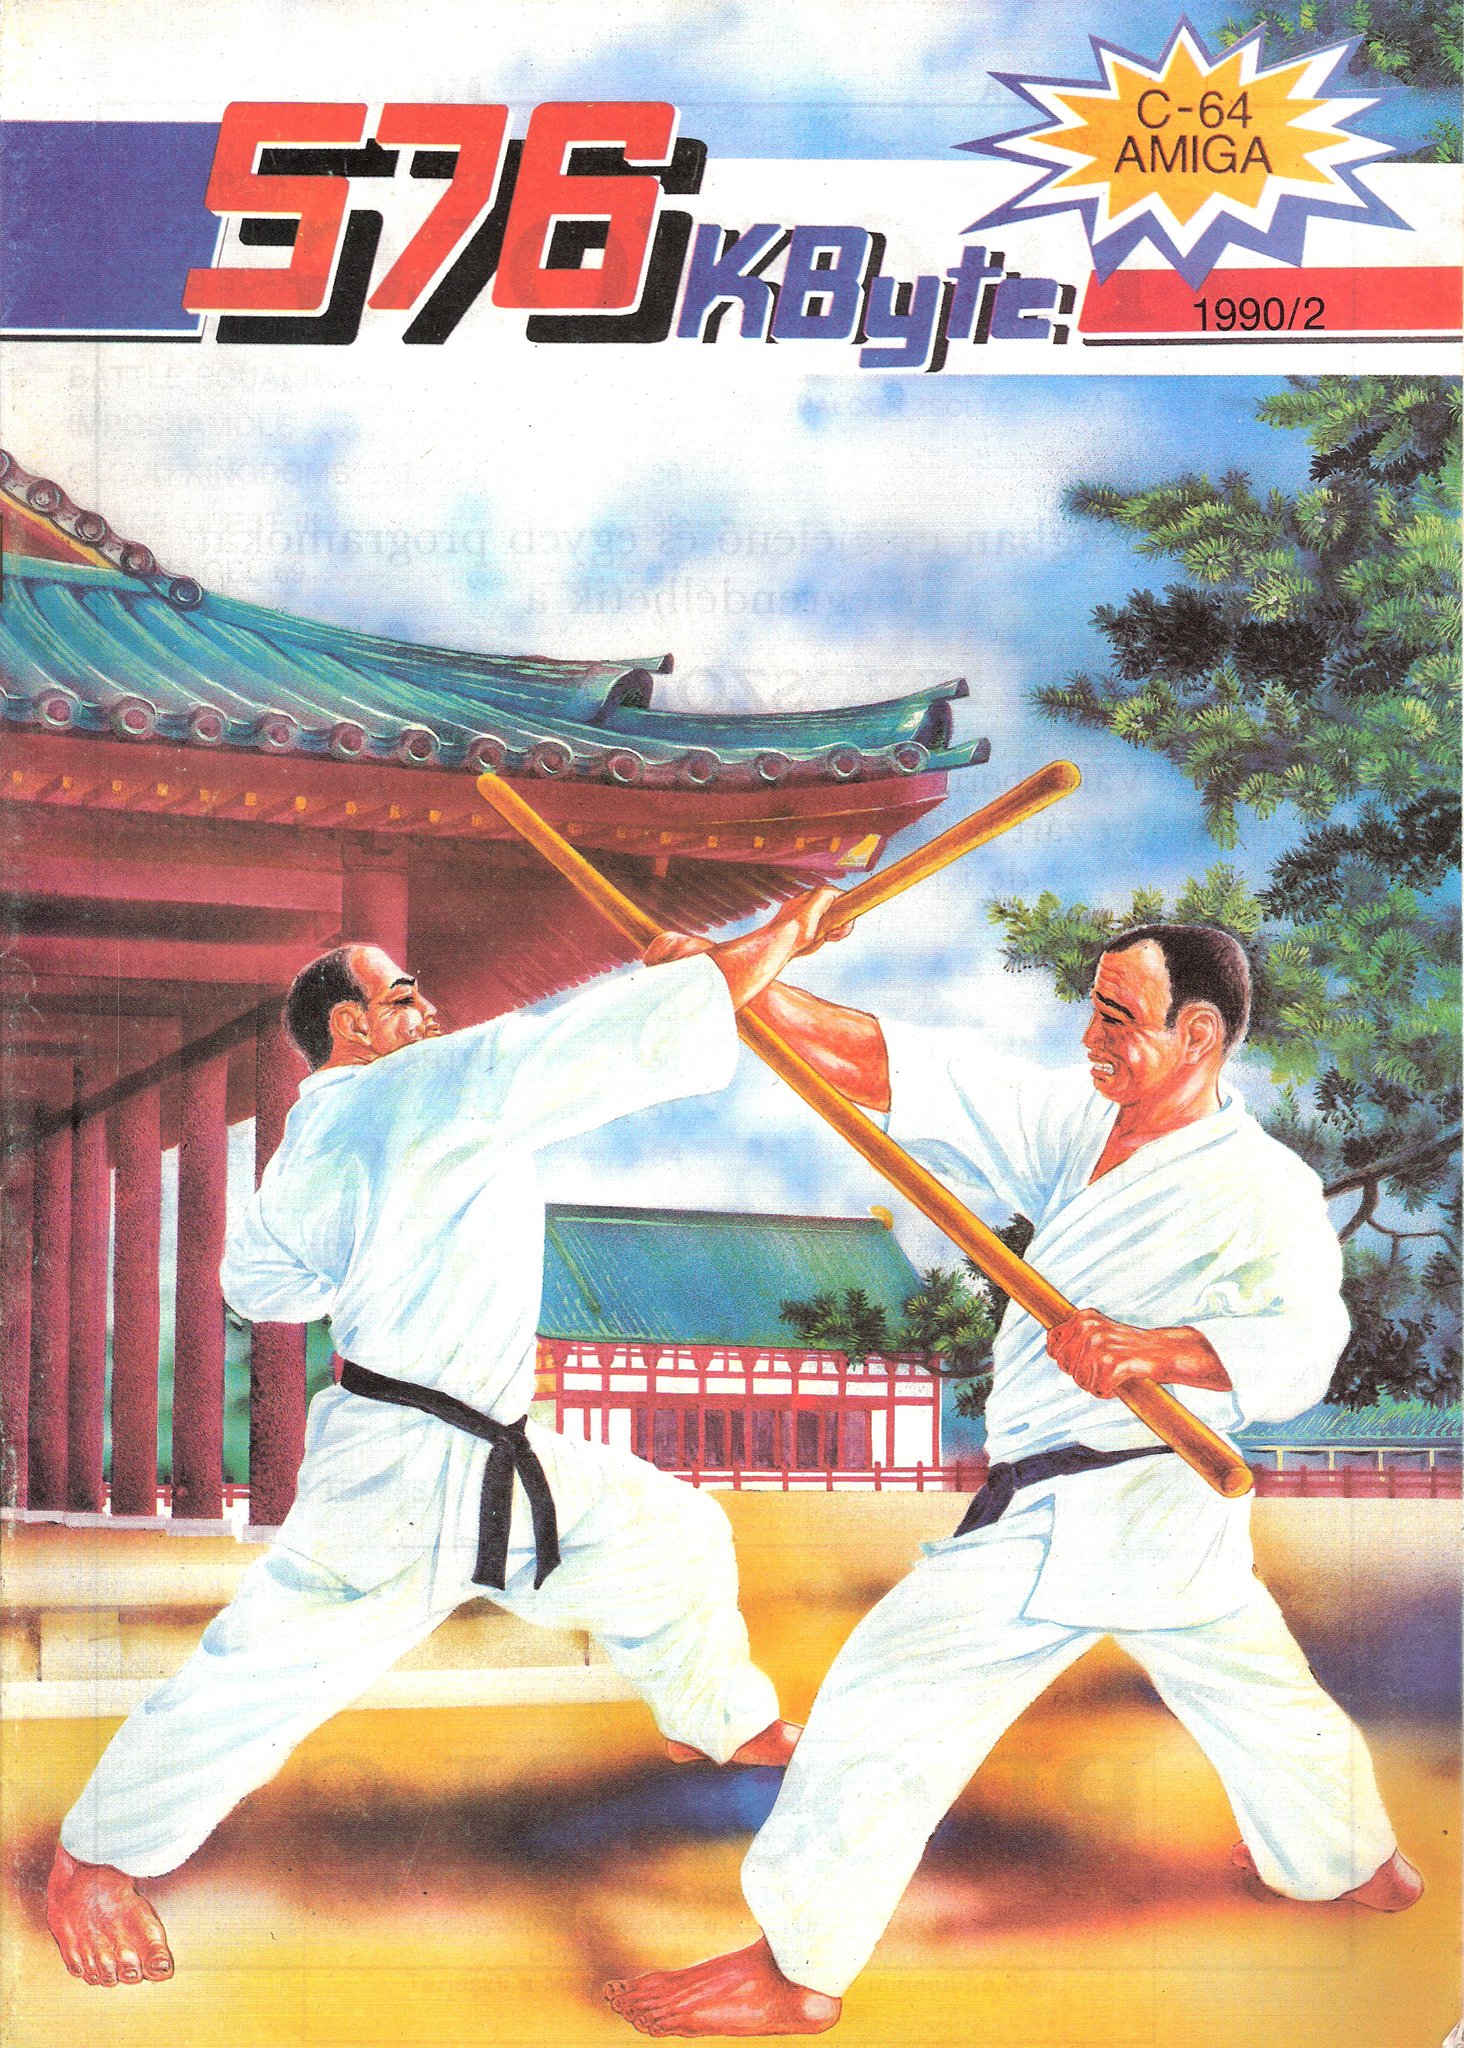 576 KByte Issue 002 (February 1990)